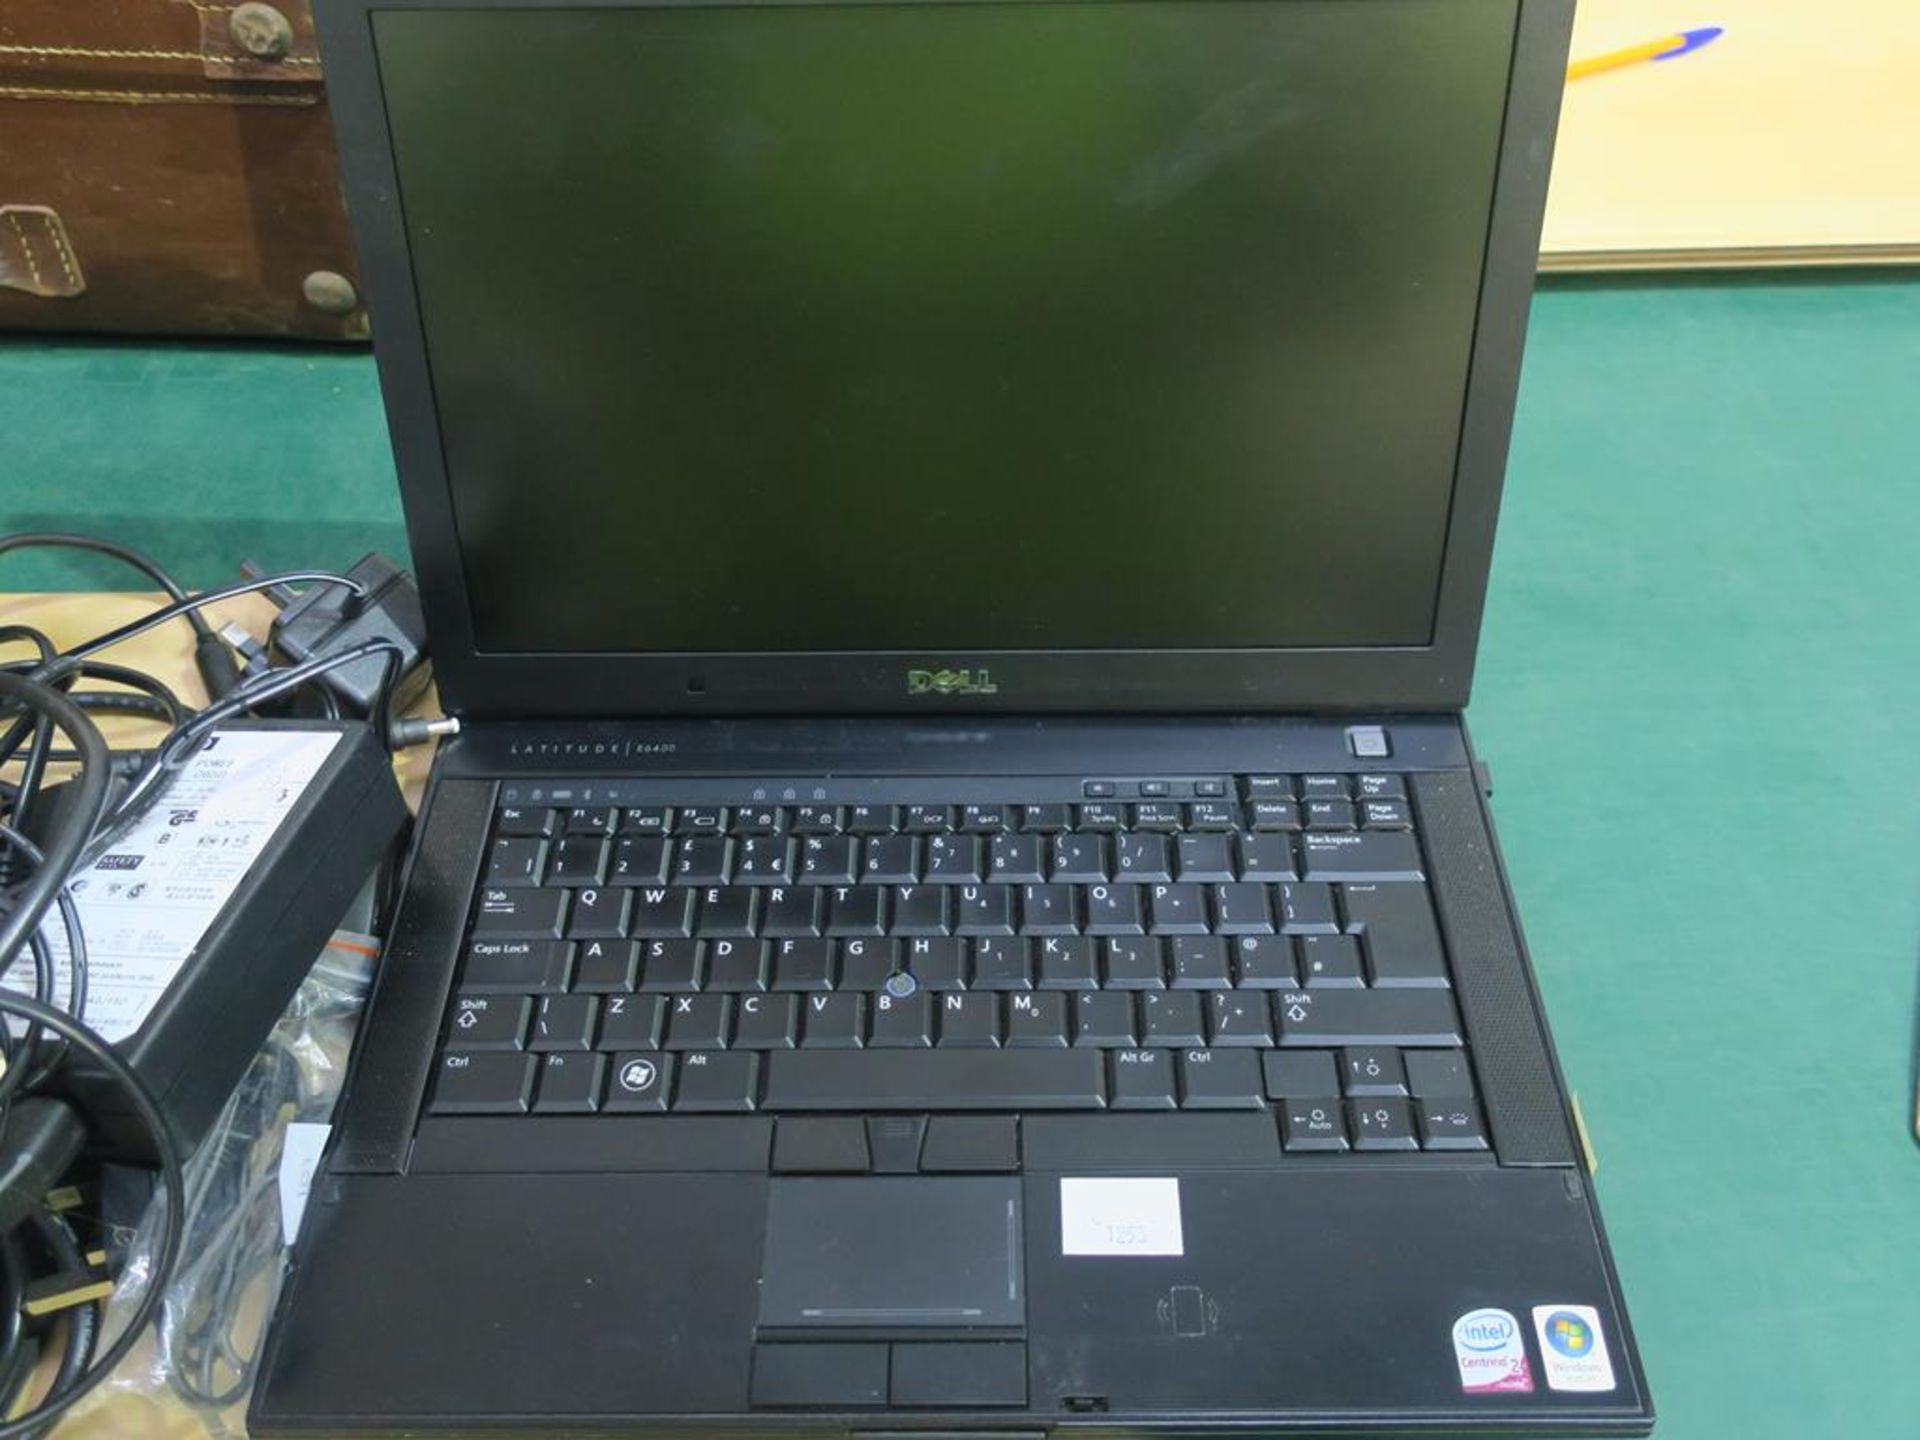 Dell Latitude E6400 Laptop with Mouse and Charger (est £30-£50) - Image 6 of 8